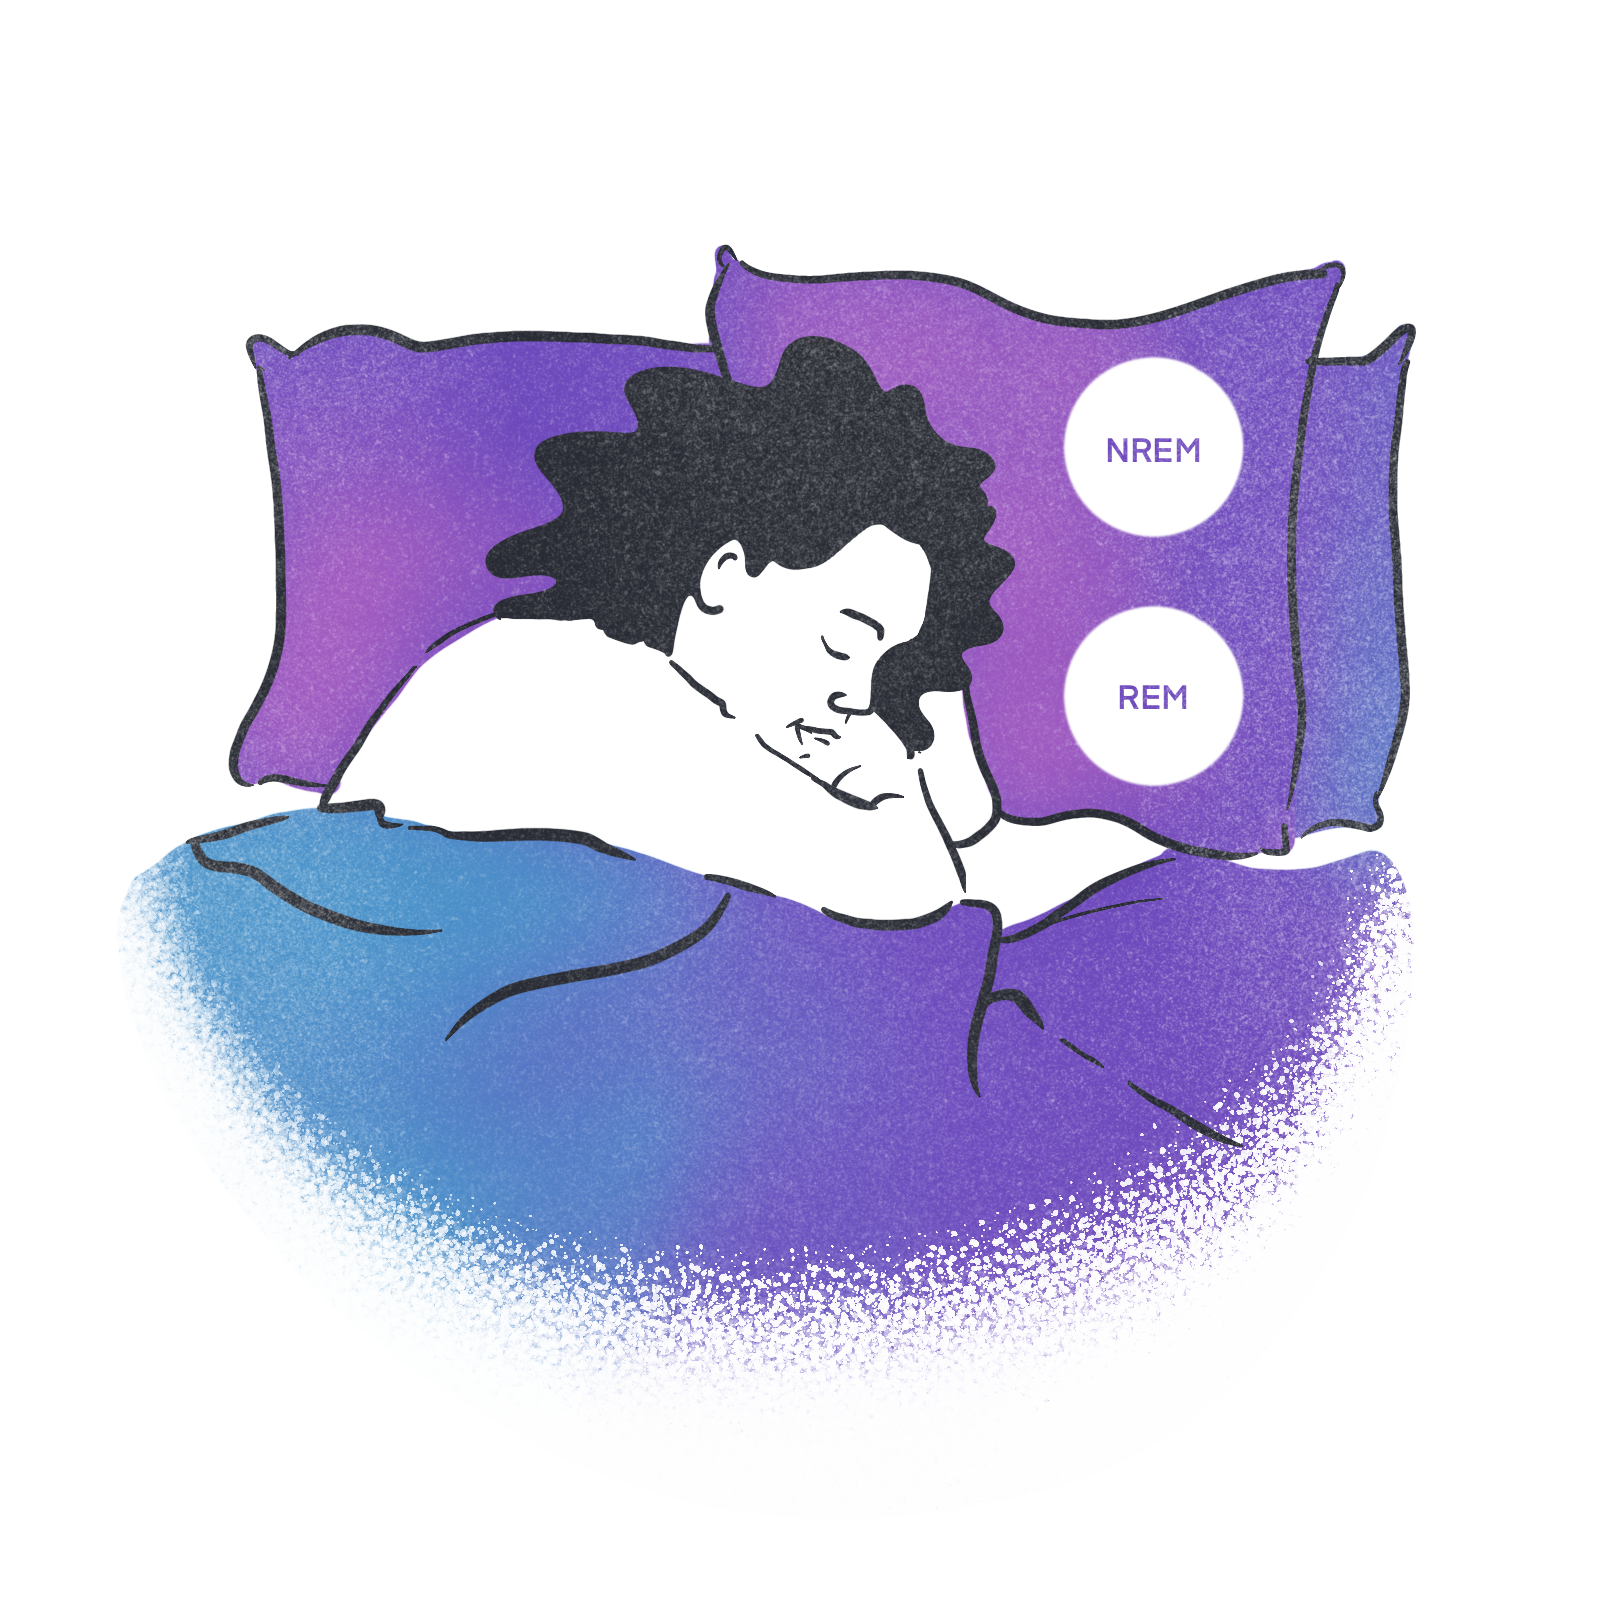 An illustration showing a woman sleeping in bed with labels for NREM sleep and REM sleep